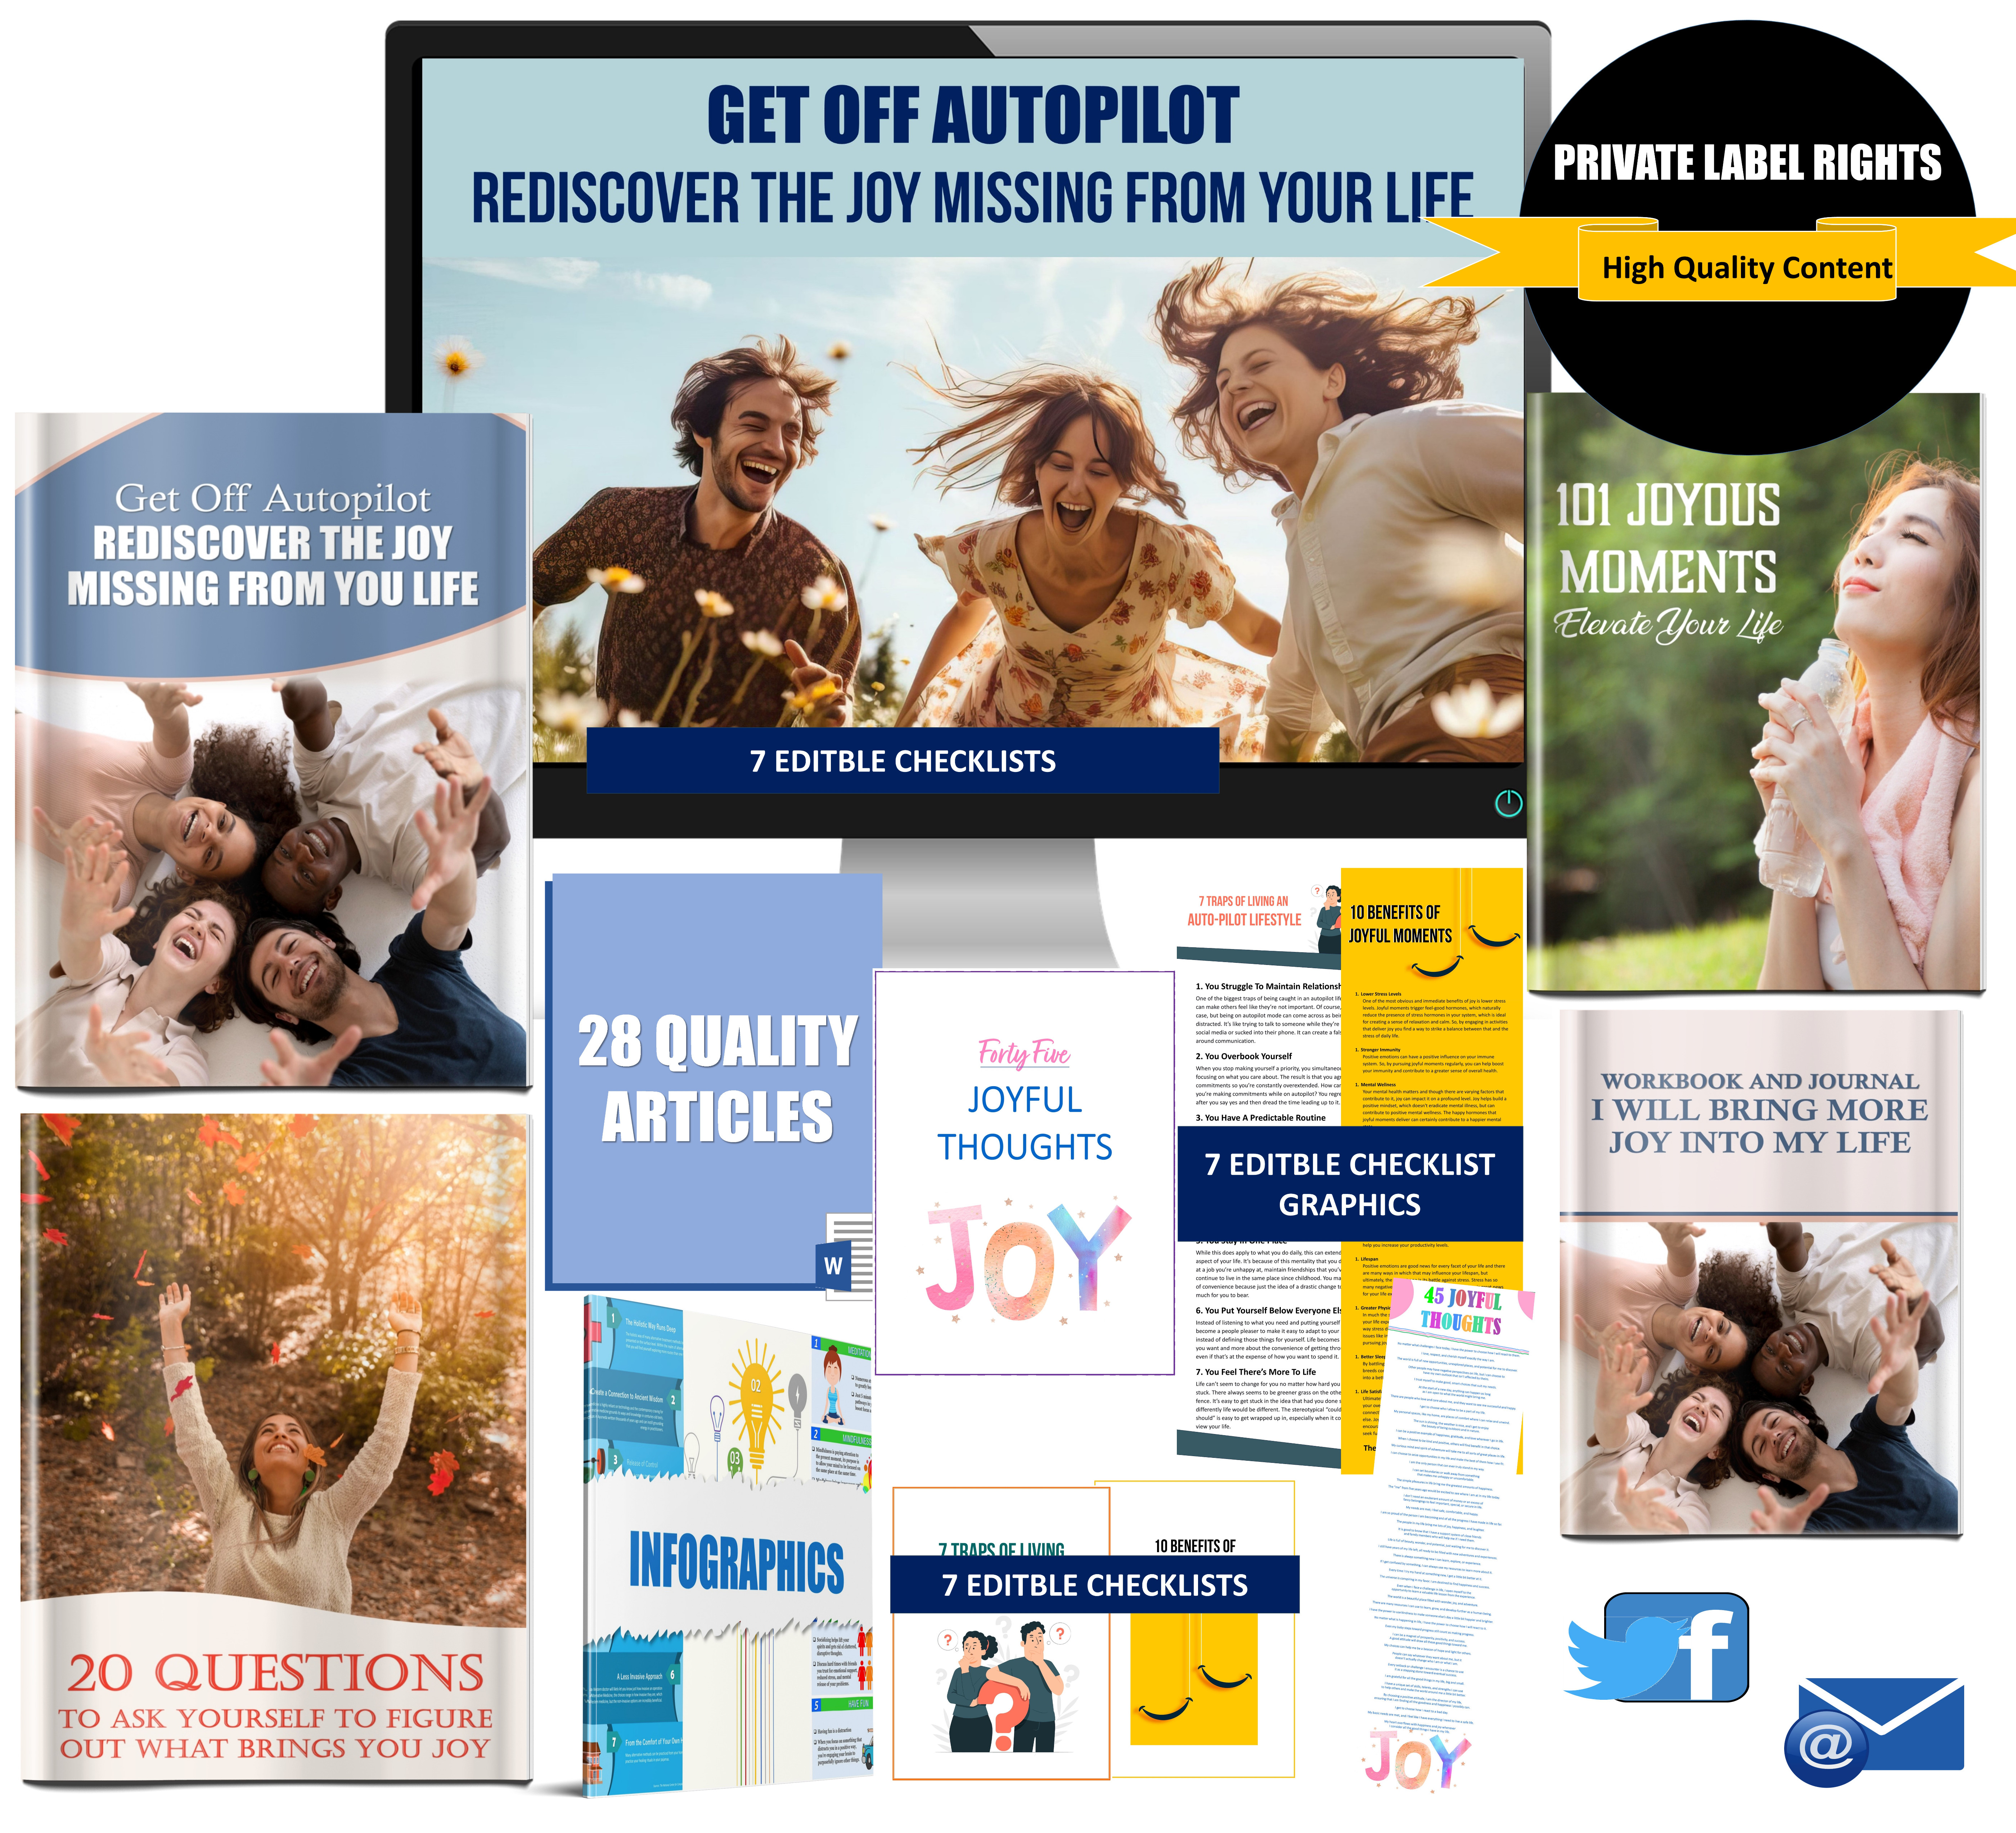 Get Off Autopilot - Rediscover The Joy Missing From Your Life Giant Content Pack with PLRLR Rights